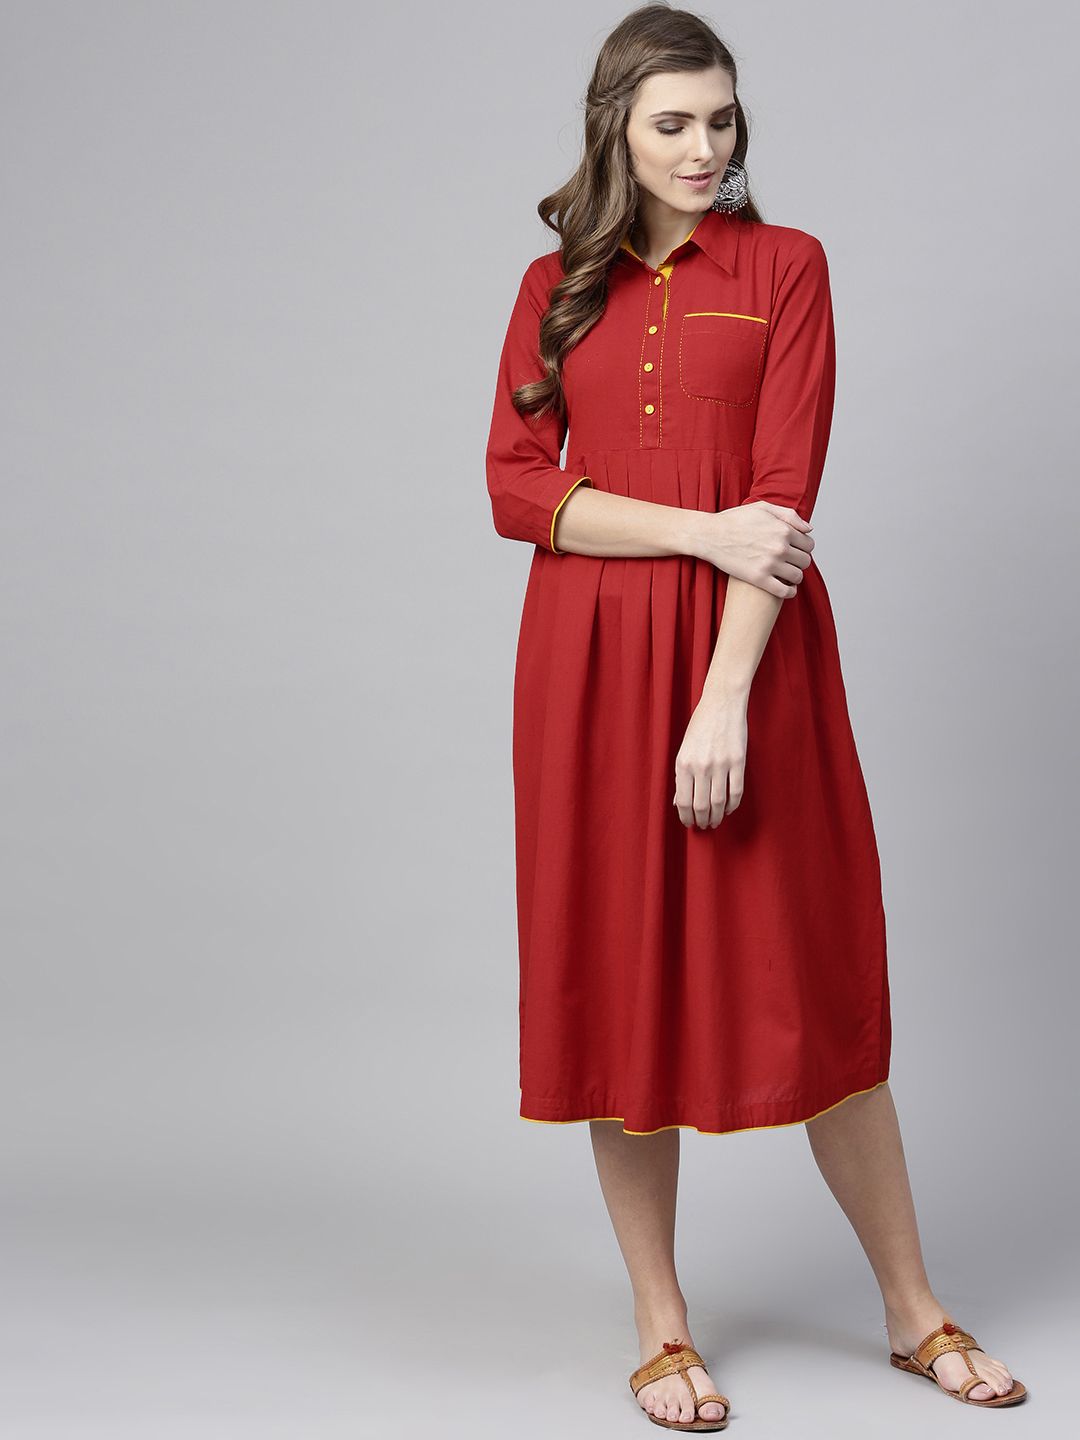 Varanga Women Red Solid A-line Dress Price in India